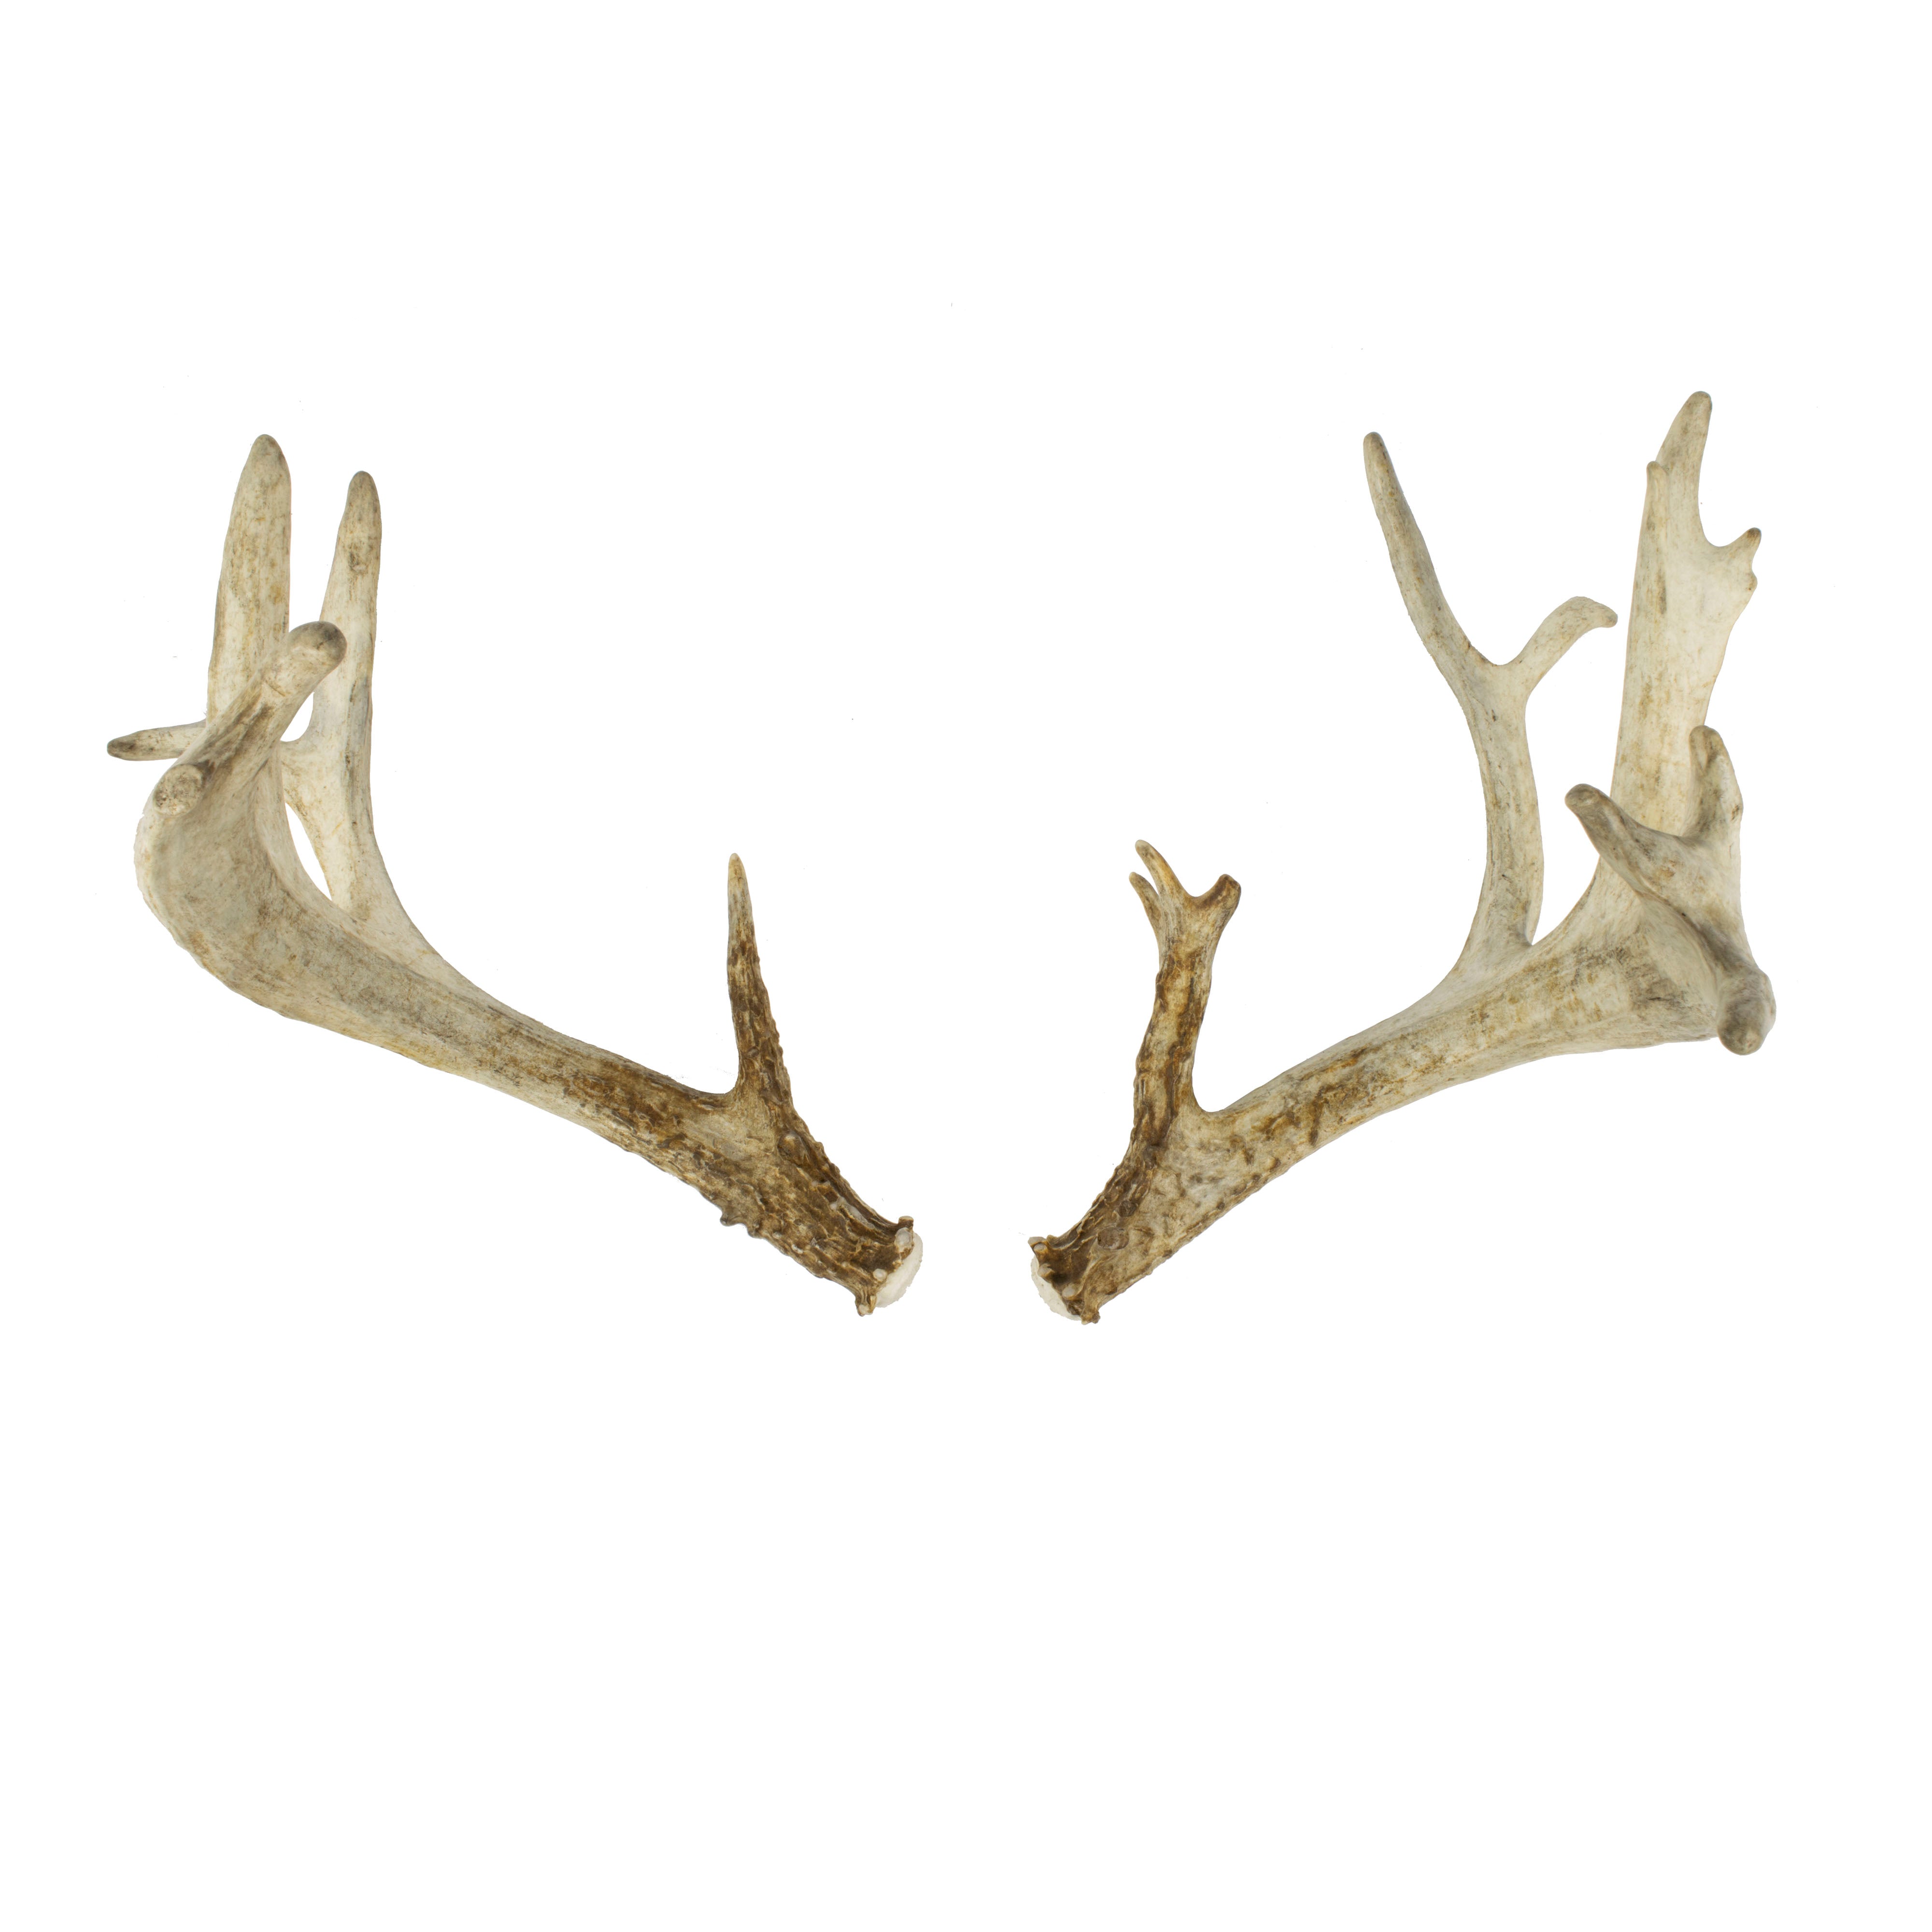 White Tail Sheds, Furnishings, Taxidermy, Deer